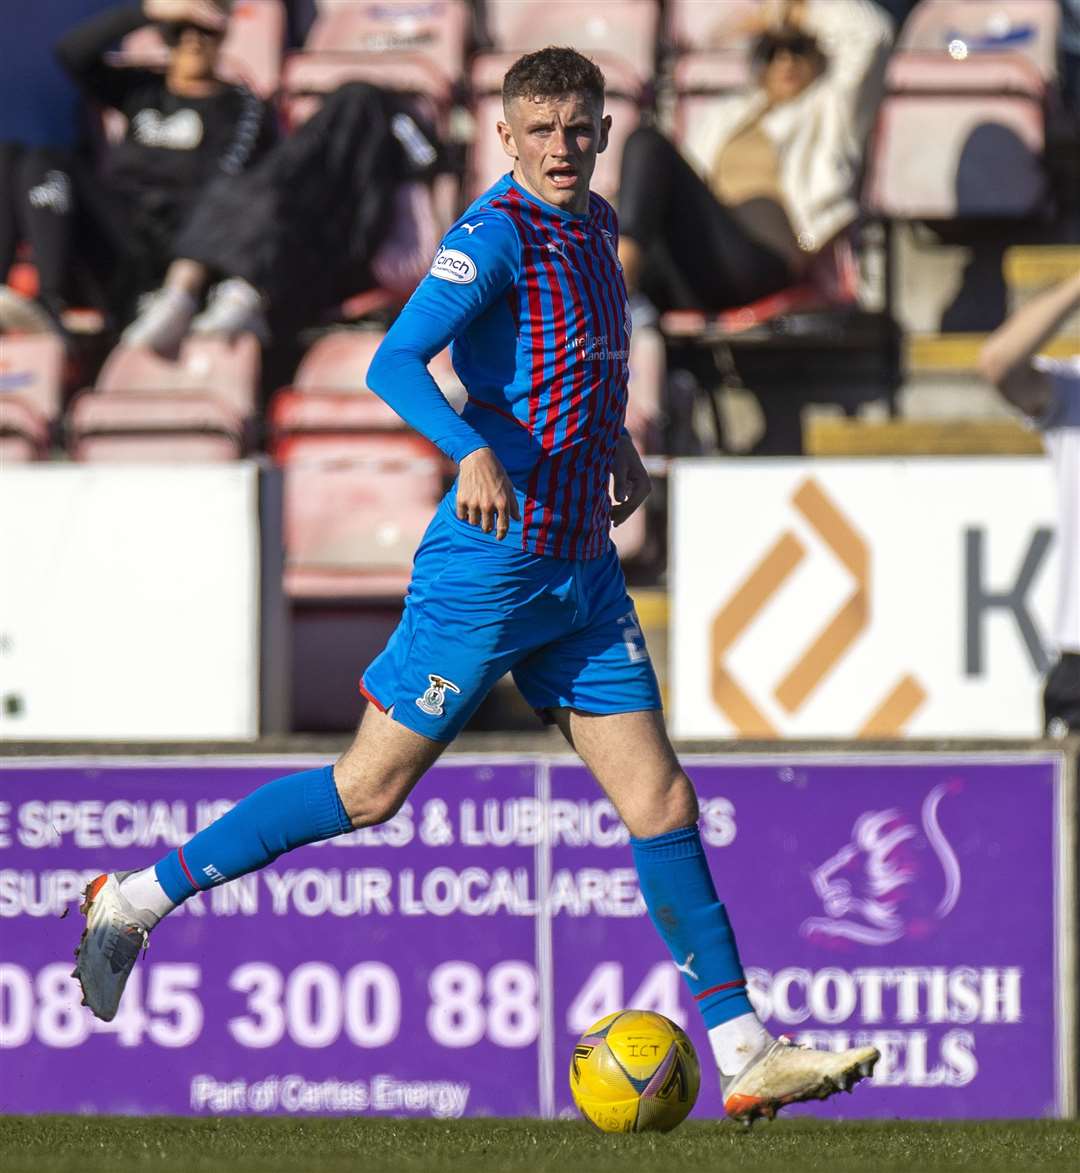 Reece McAlear was the hero for Inverness.